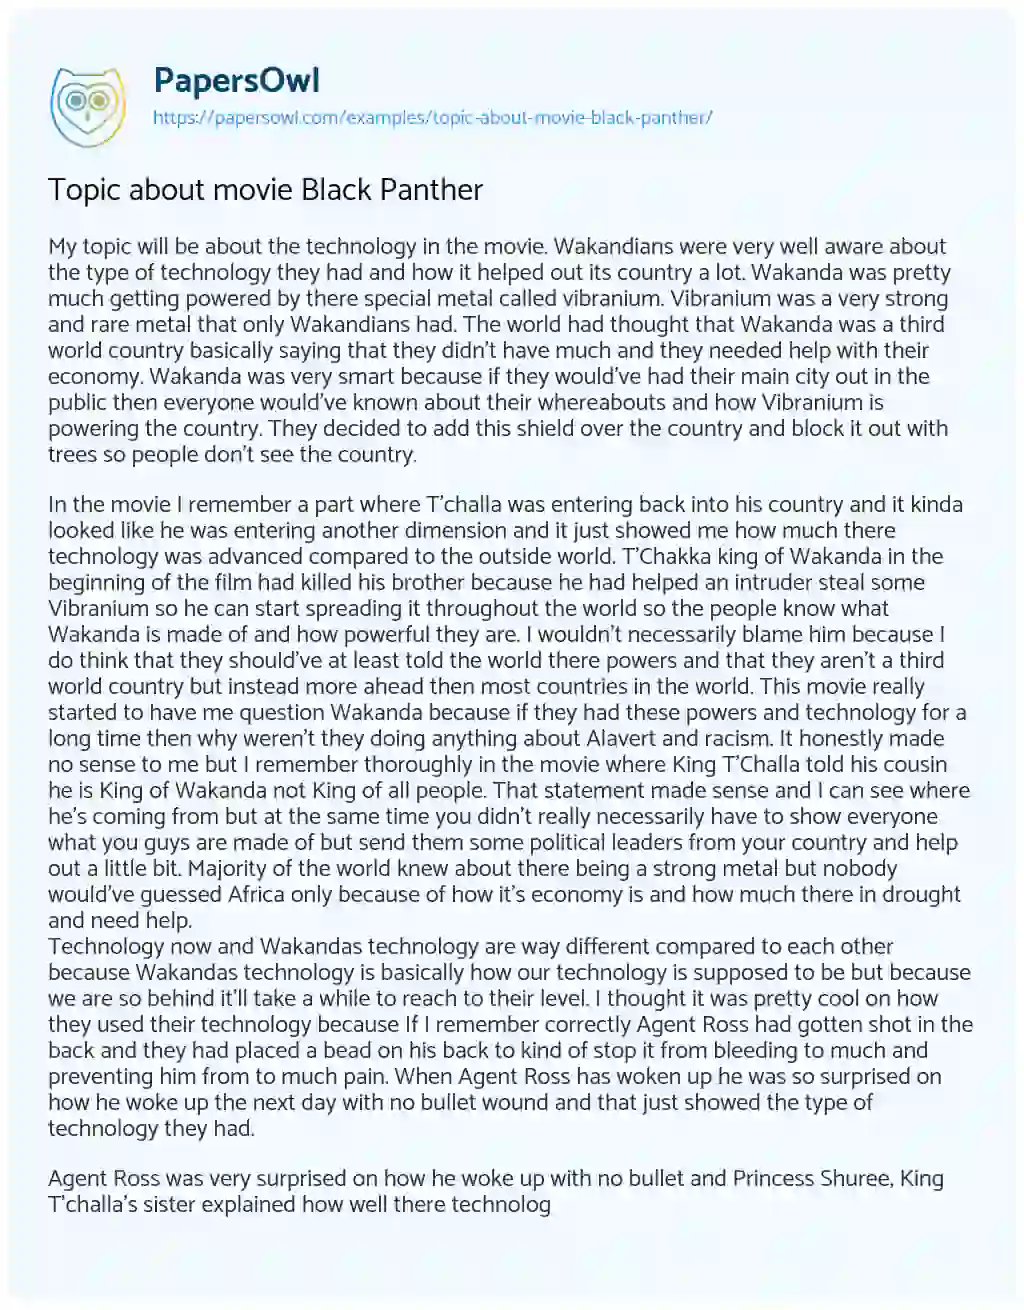 Essay on Topic about Movie Black Panther